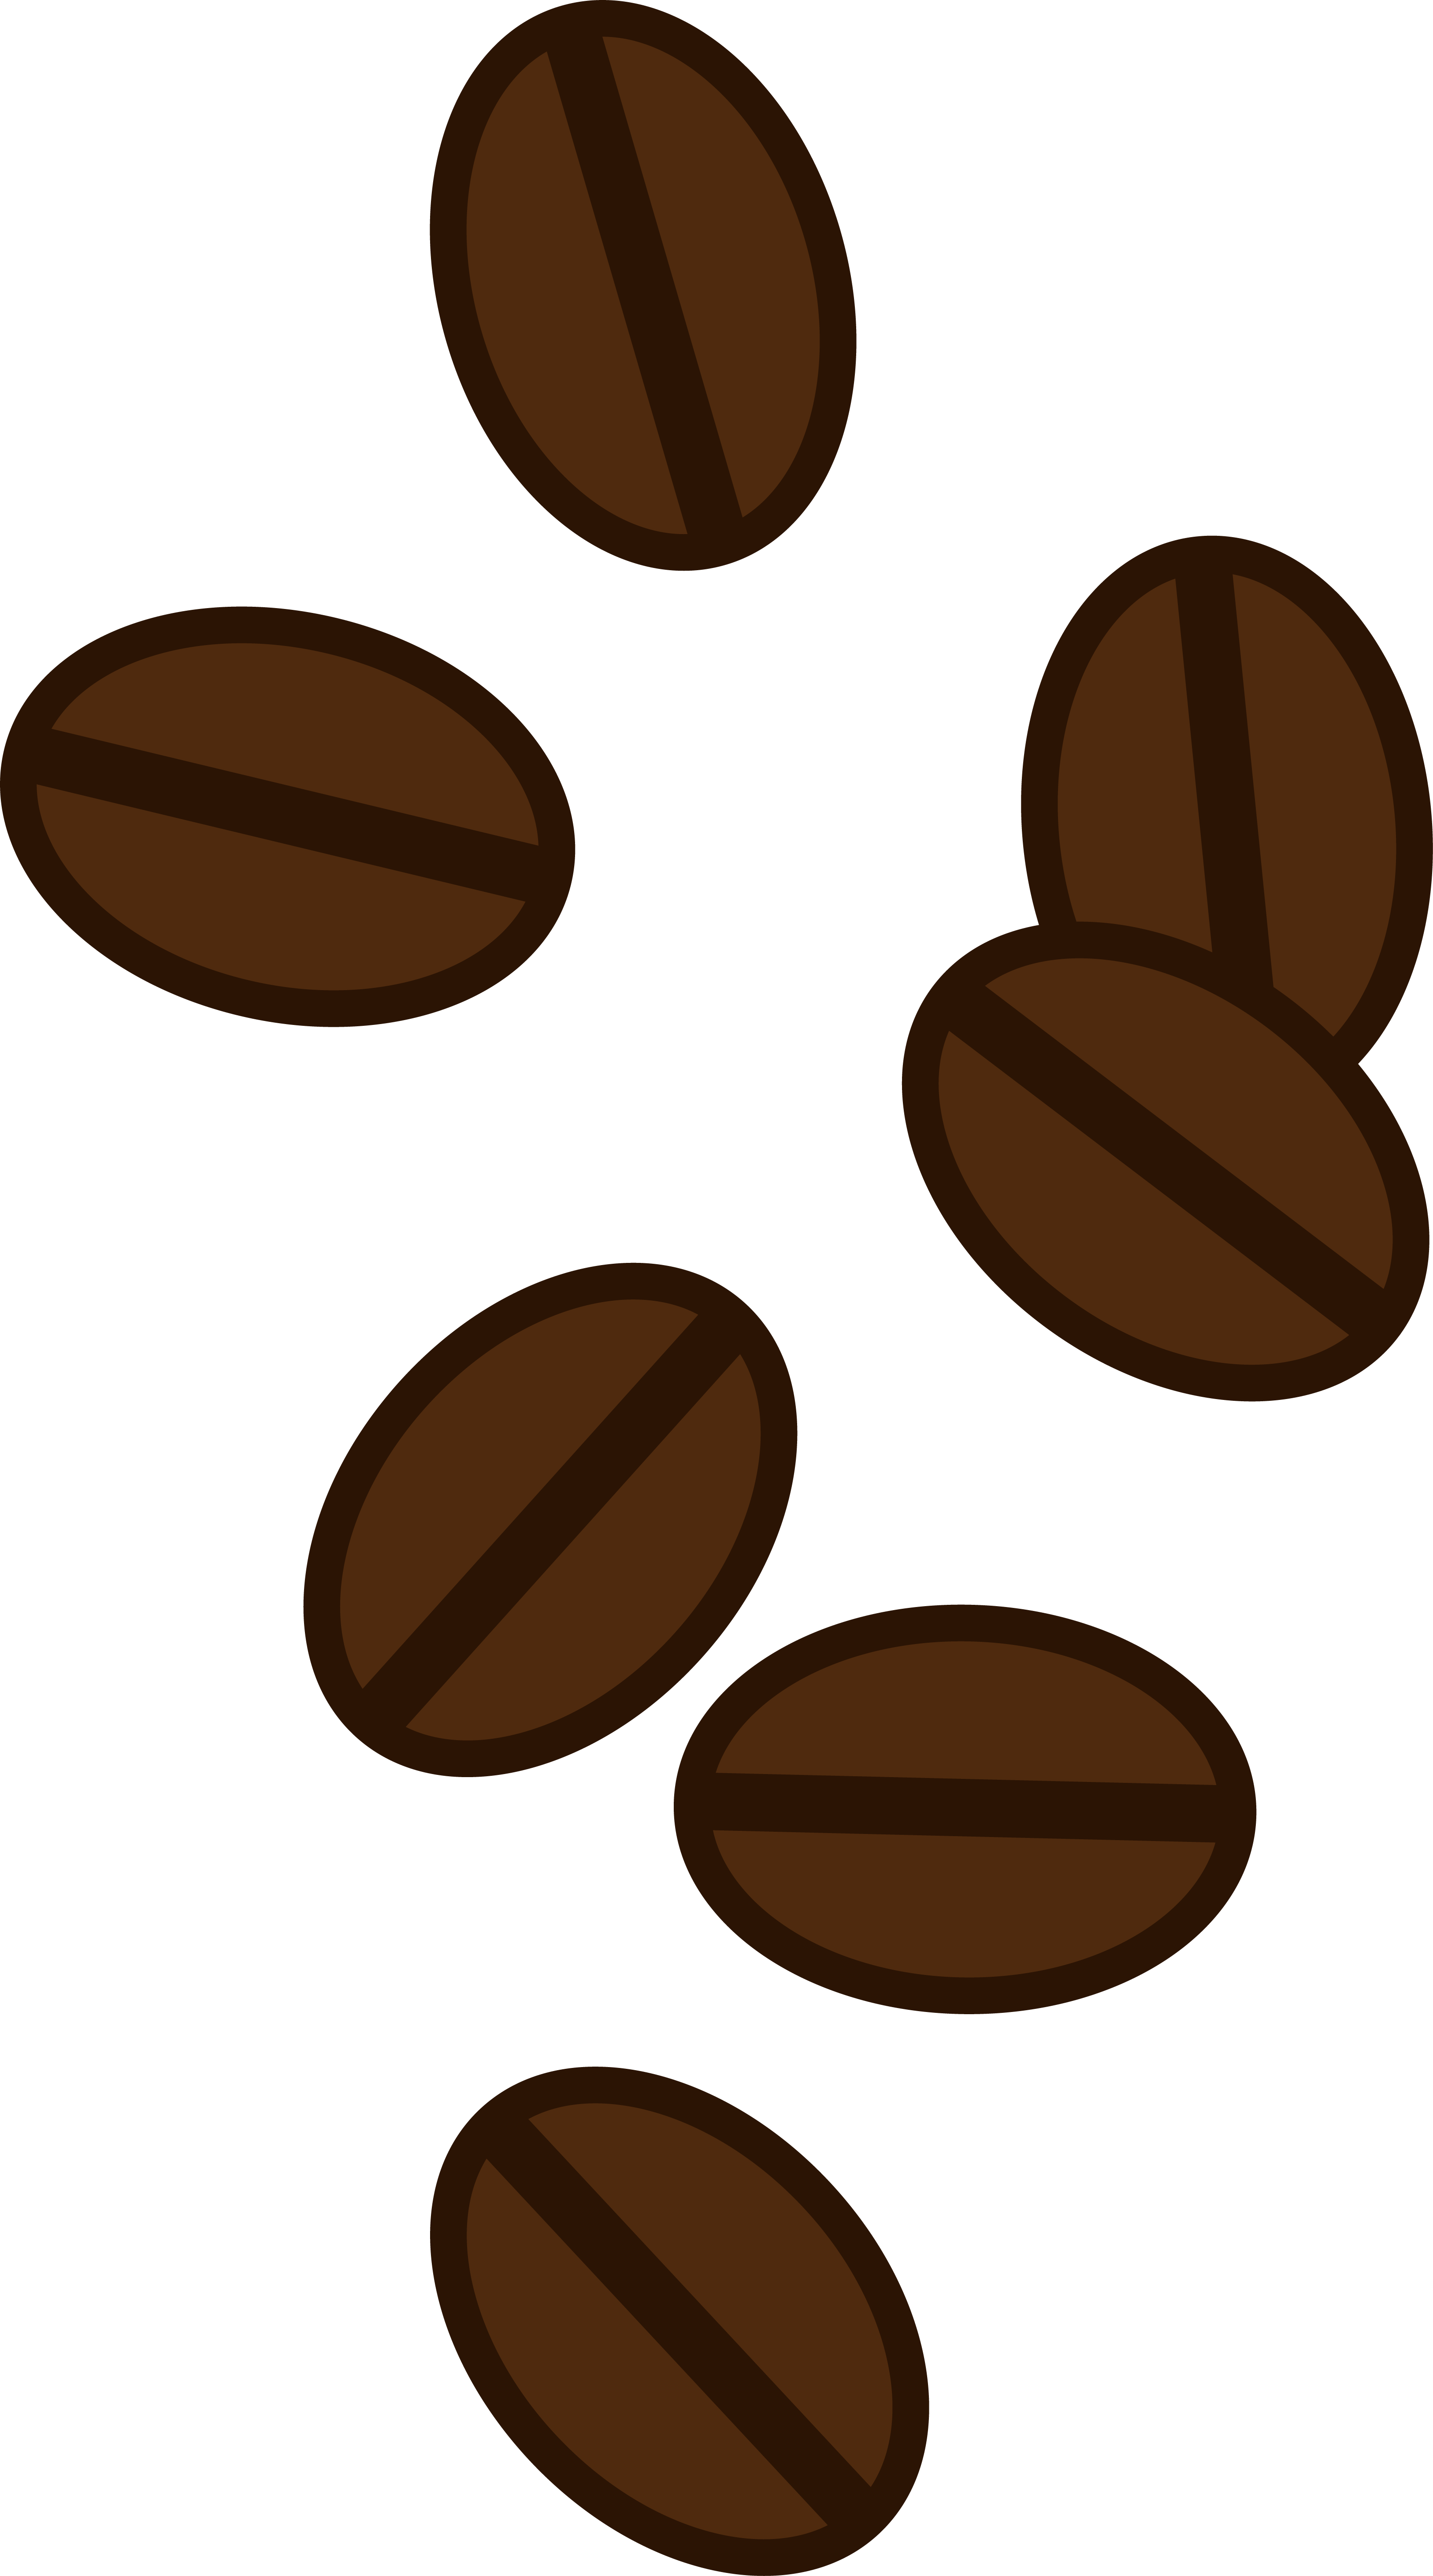 Coffee grounds clipart - Clipground